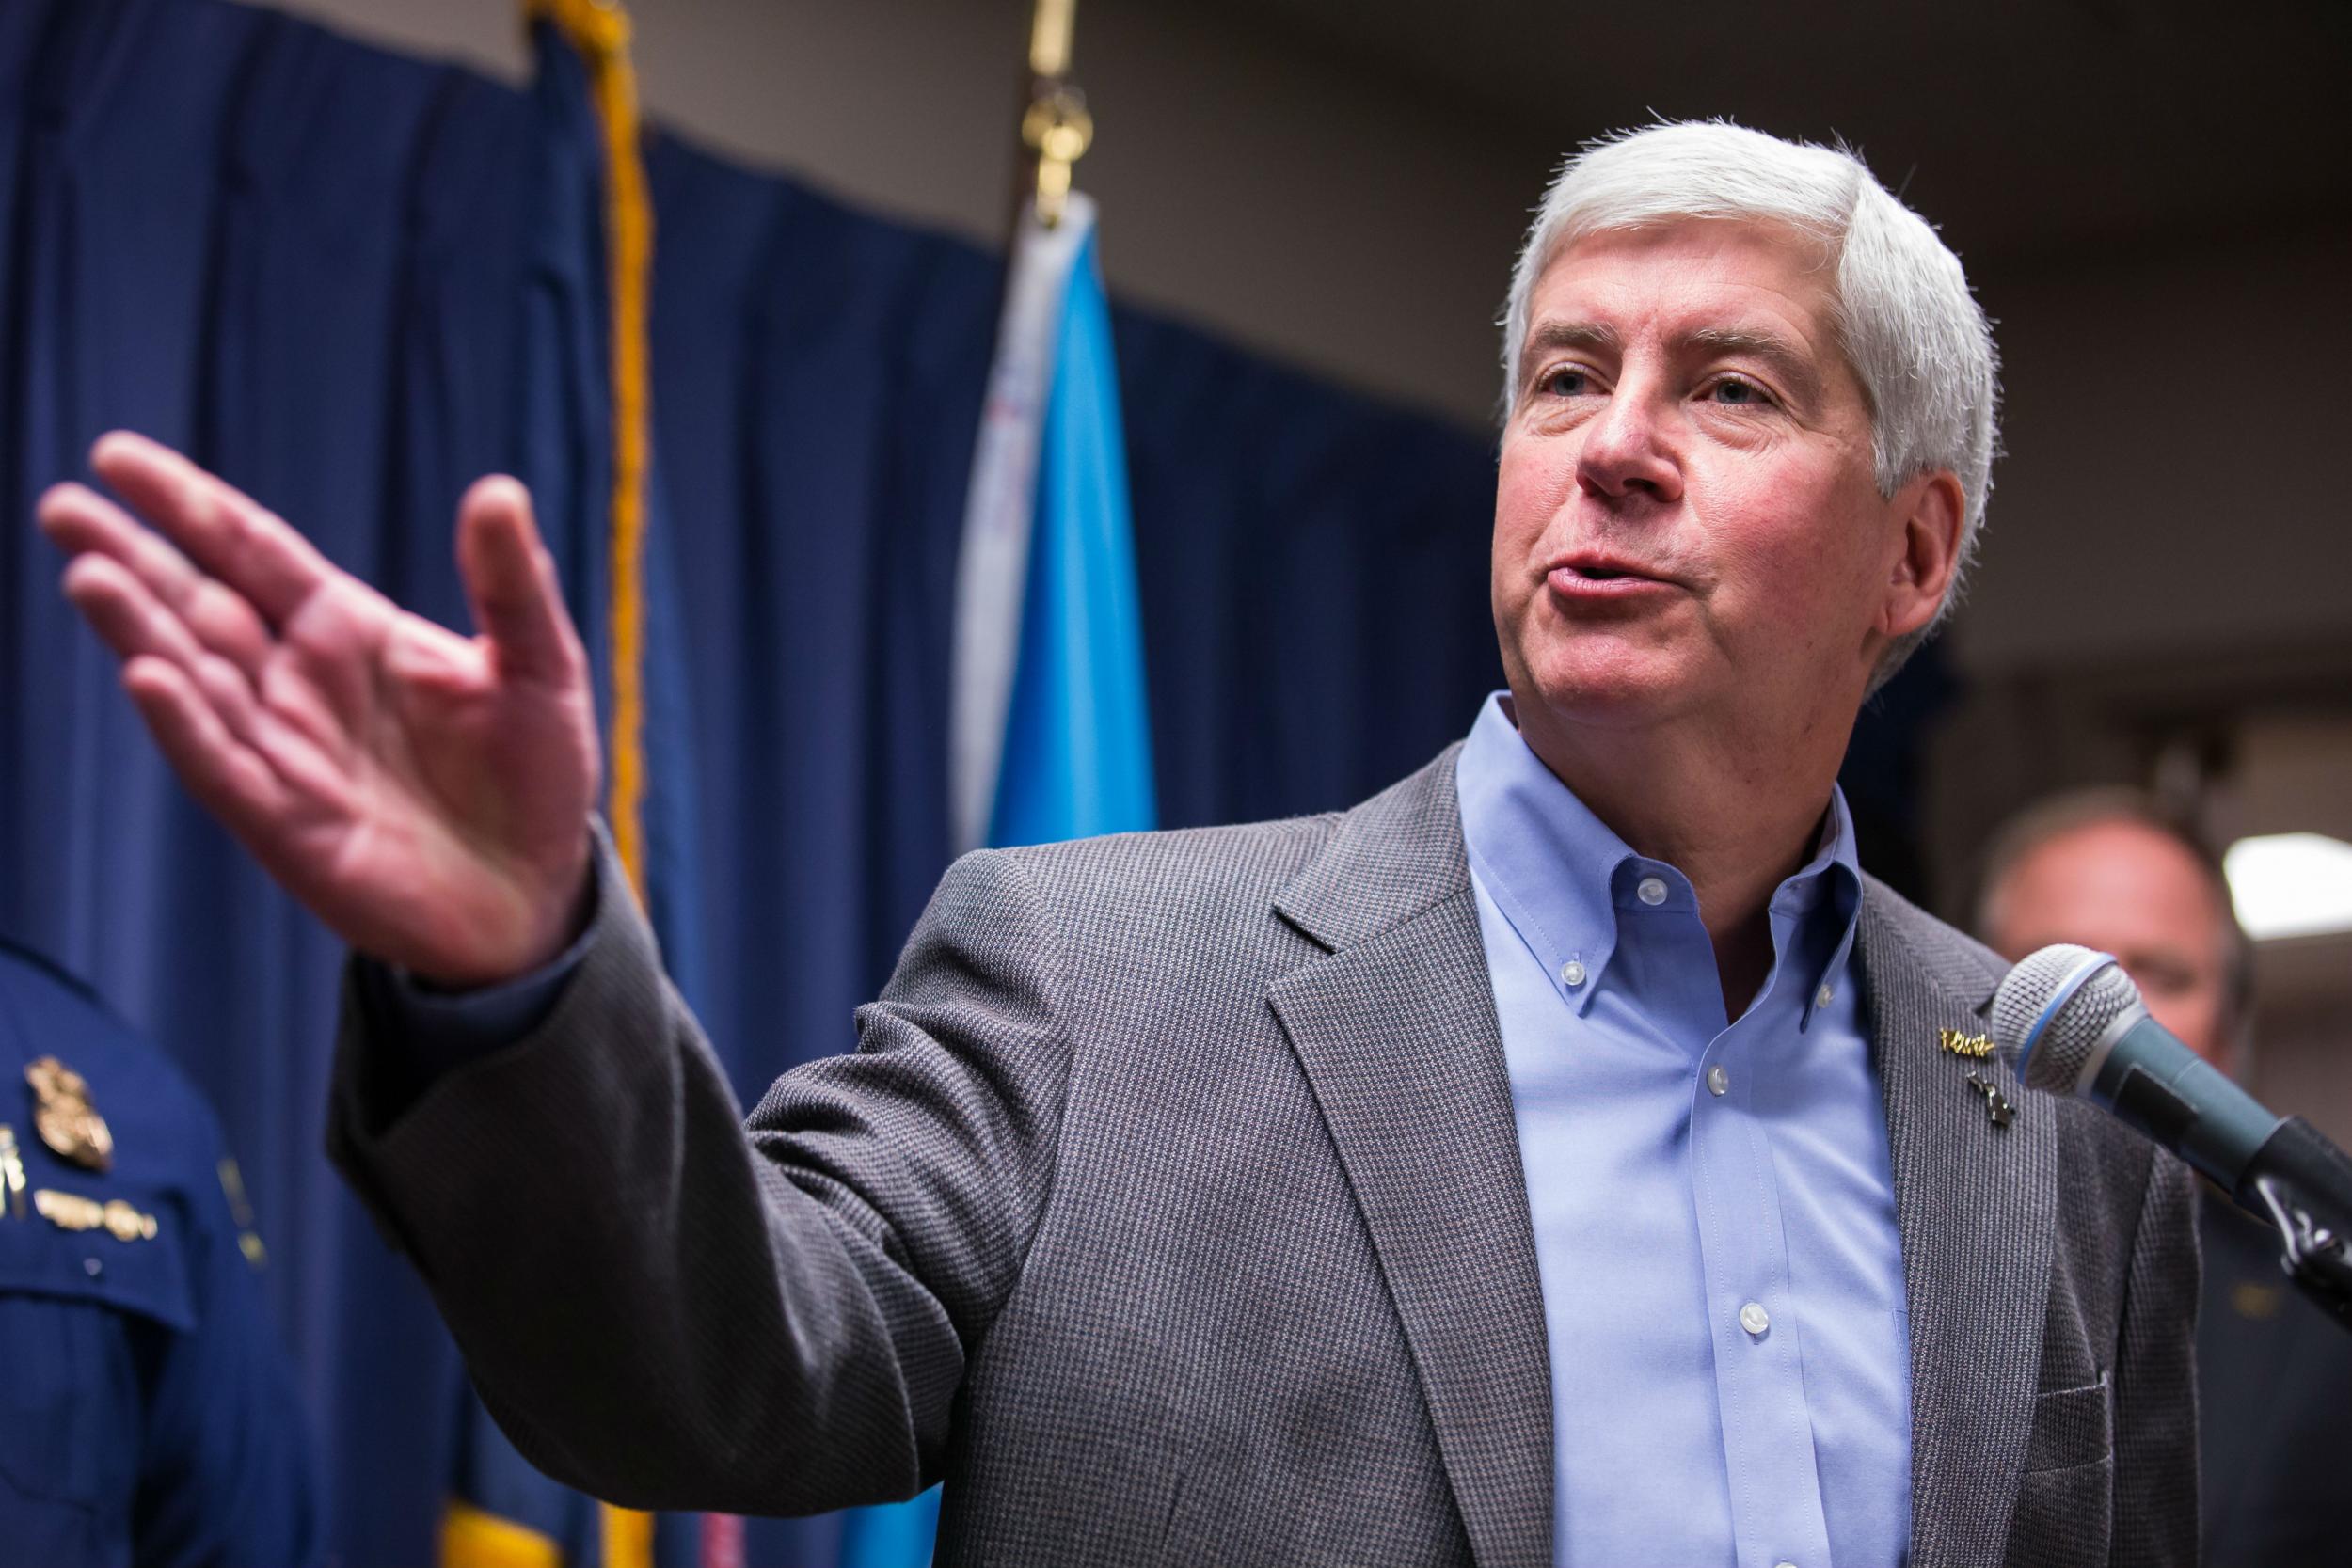 Governor Snyder said replacing all the pipes straight away was not the 'best approach'